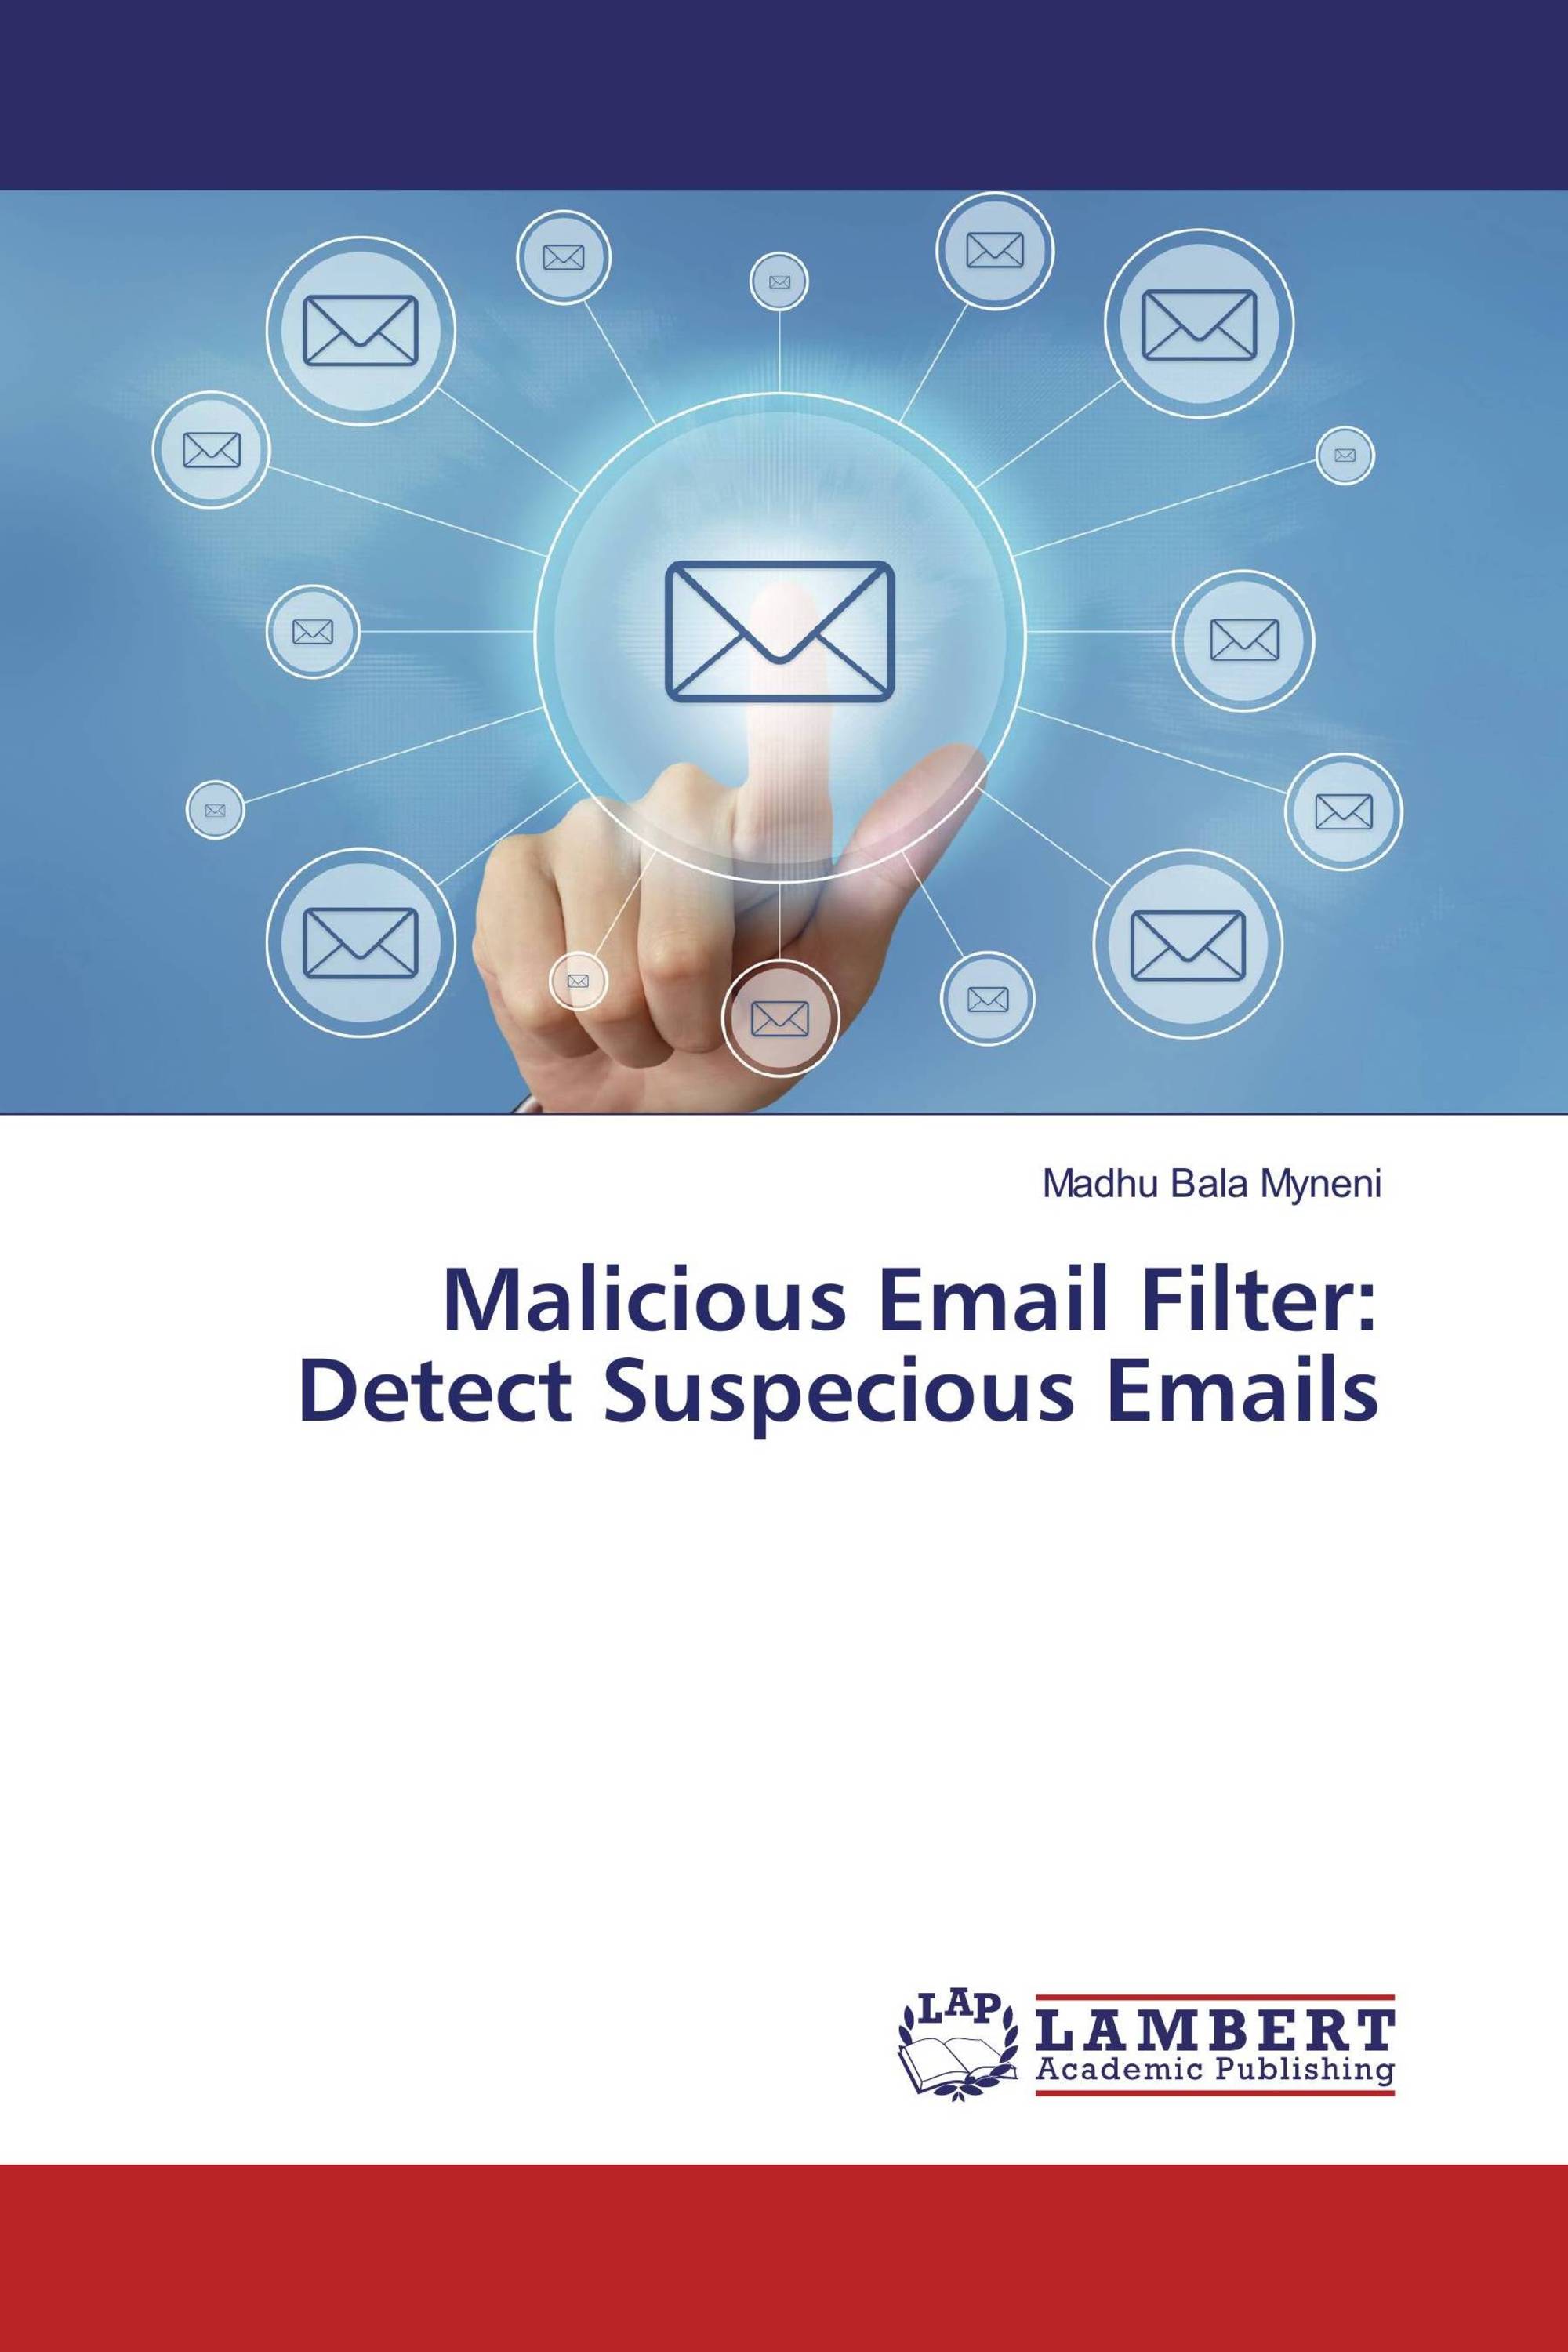 Malicious Email Filter: Detect Suspicious Emails